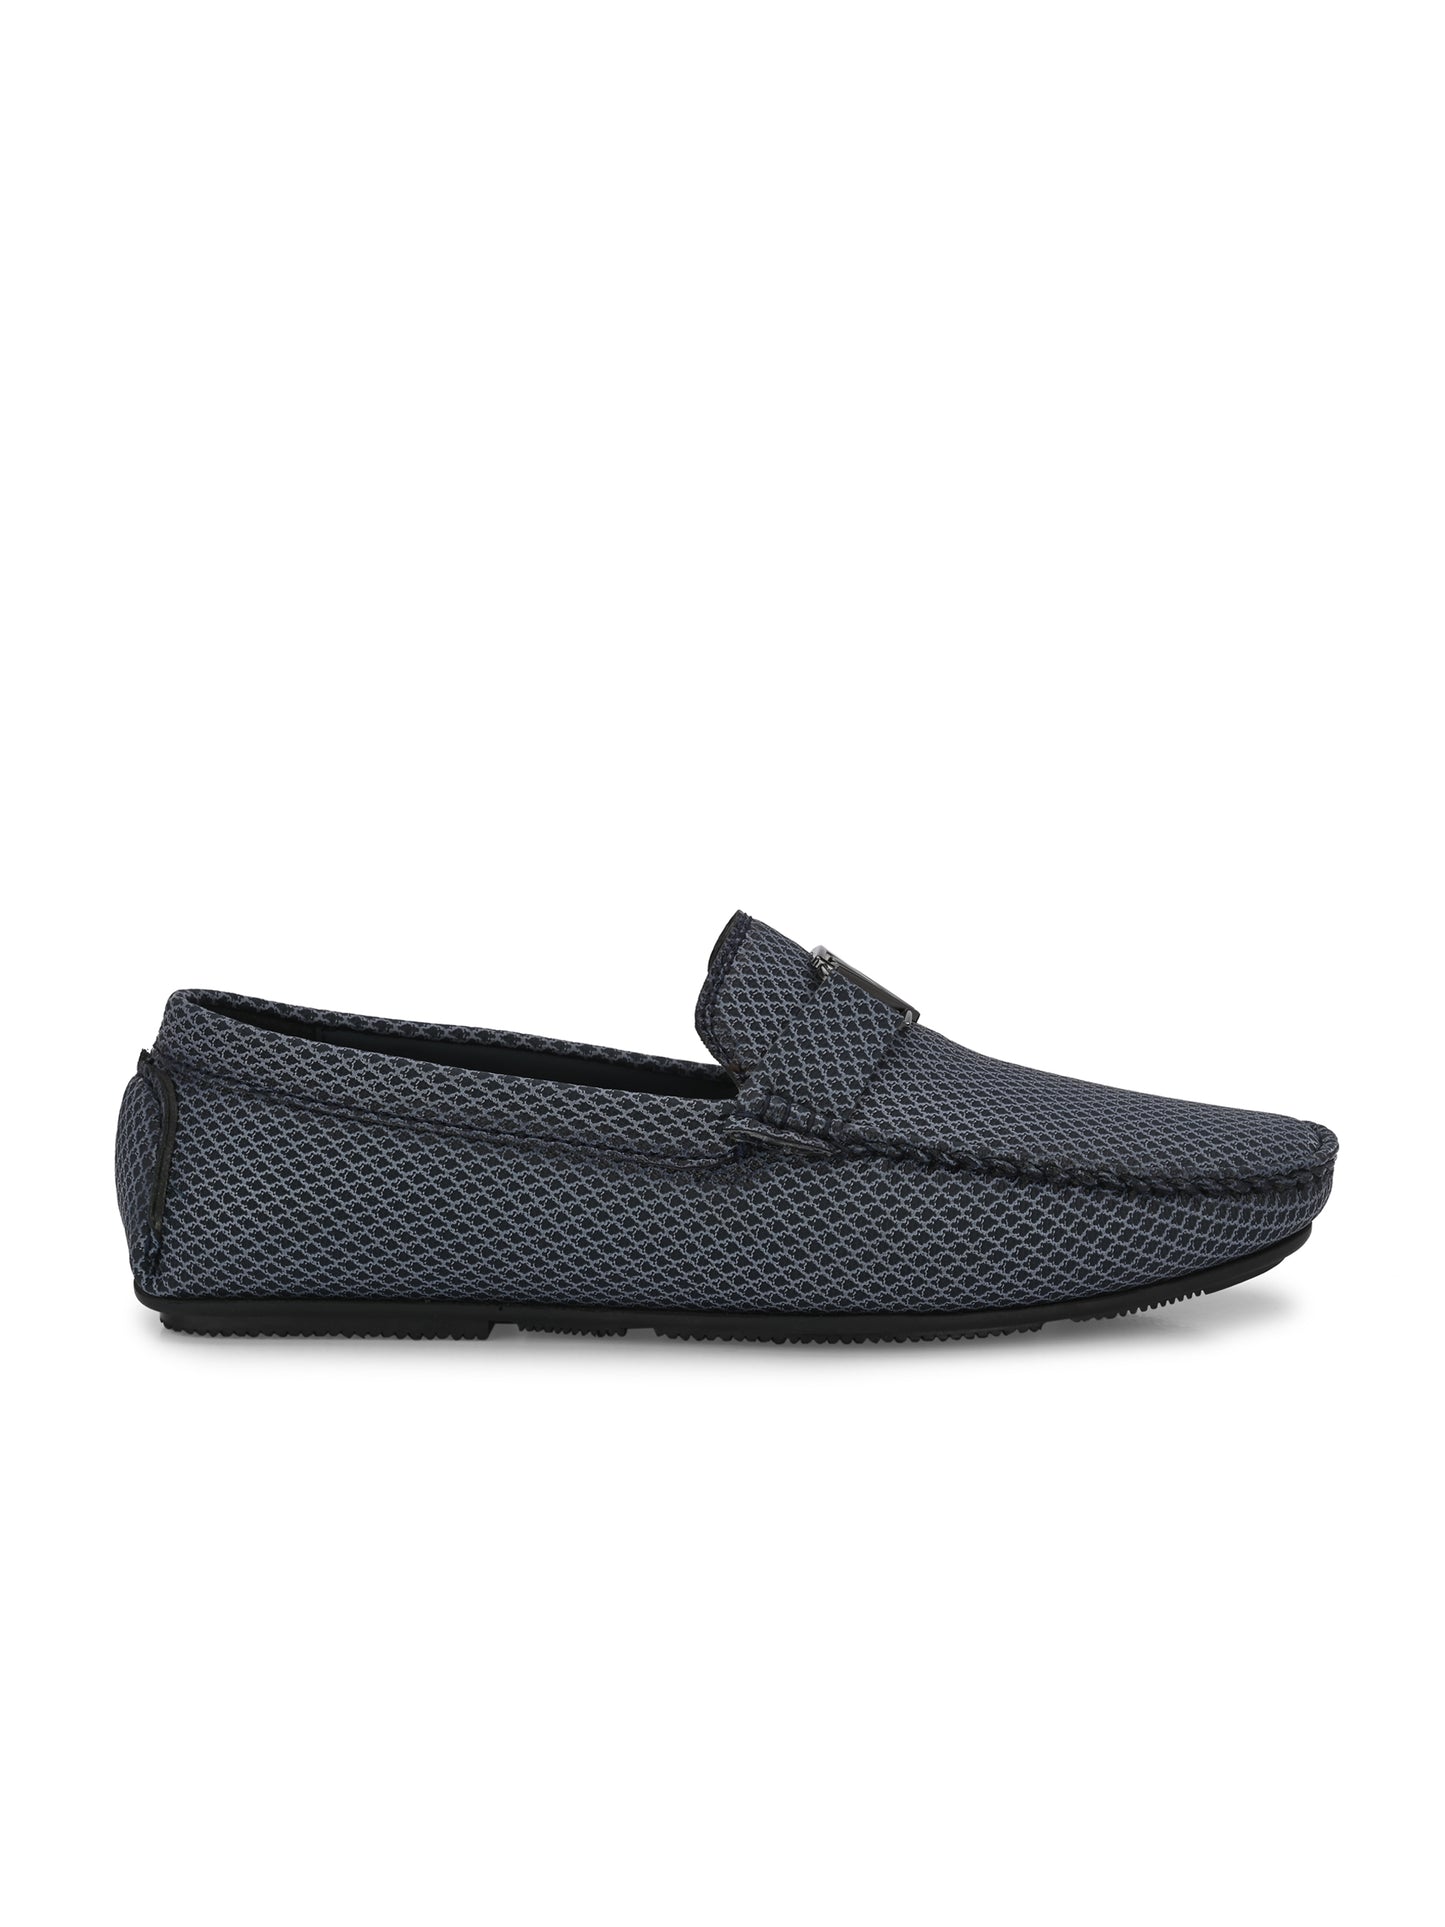 Guava Men's Blue Casual Slip On Driving Loafers (GV15JA831)